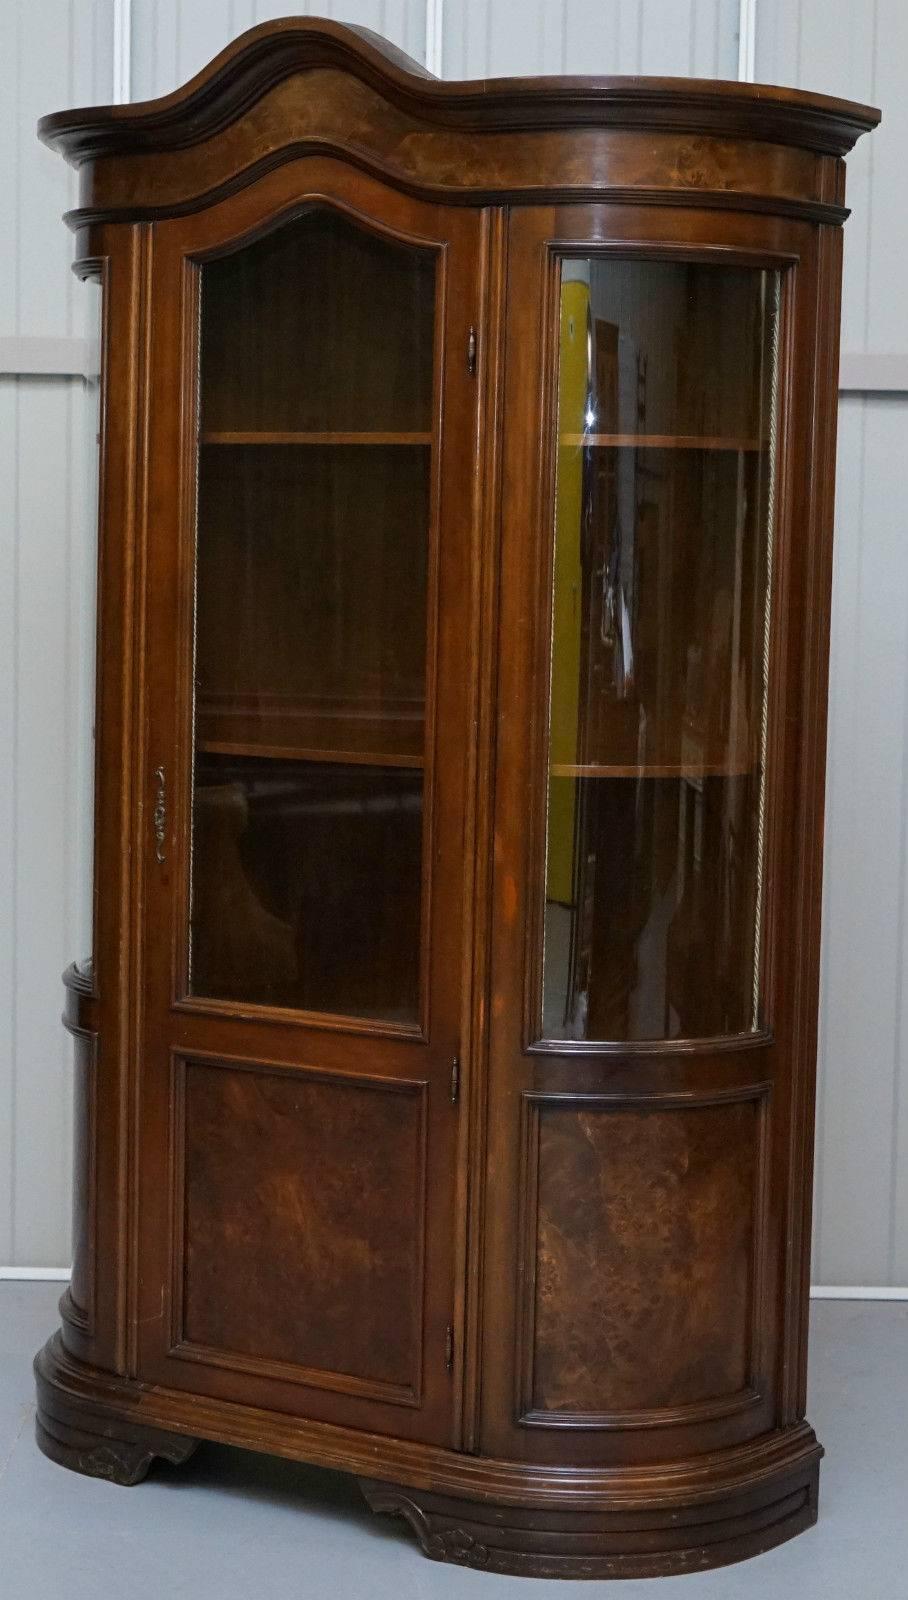 20th Century English Regency Style Walnut and Mahogany Bow Fronted Display Cabinet Bookcase